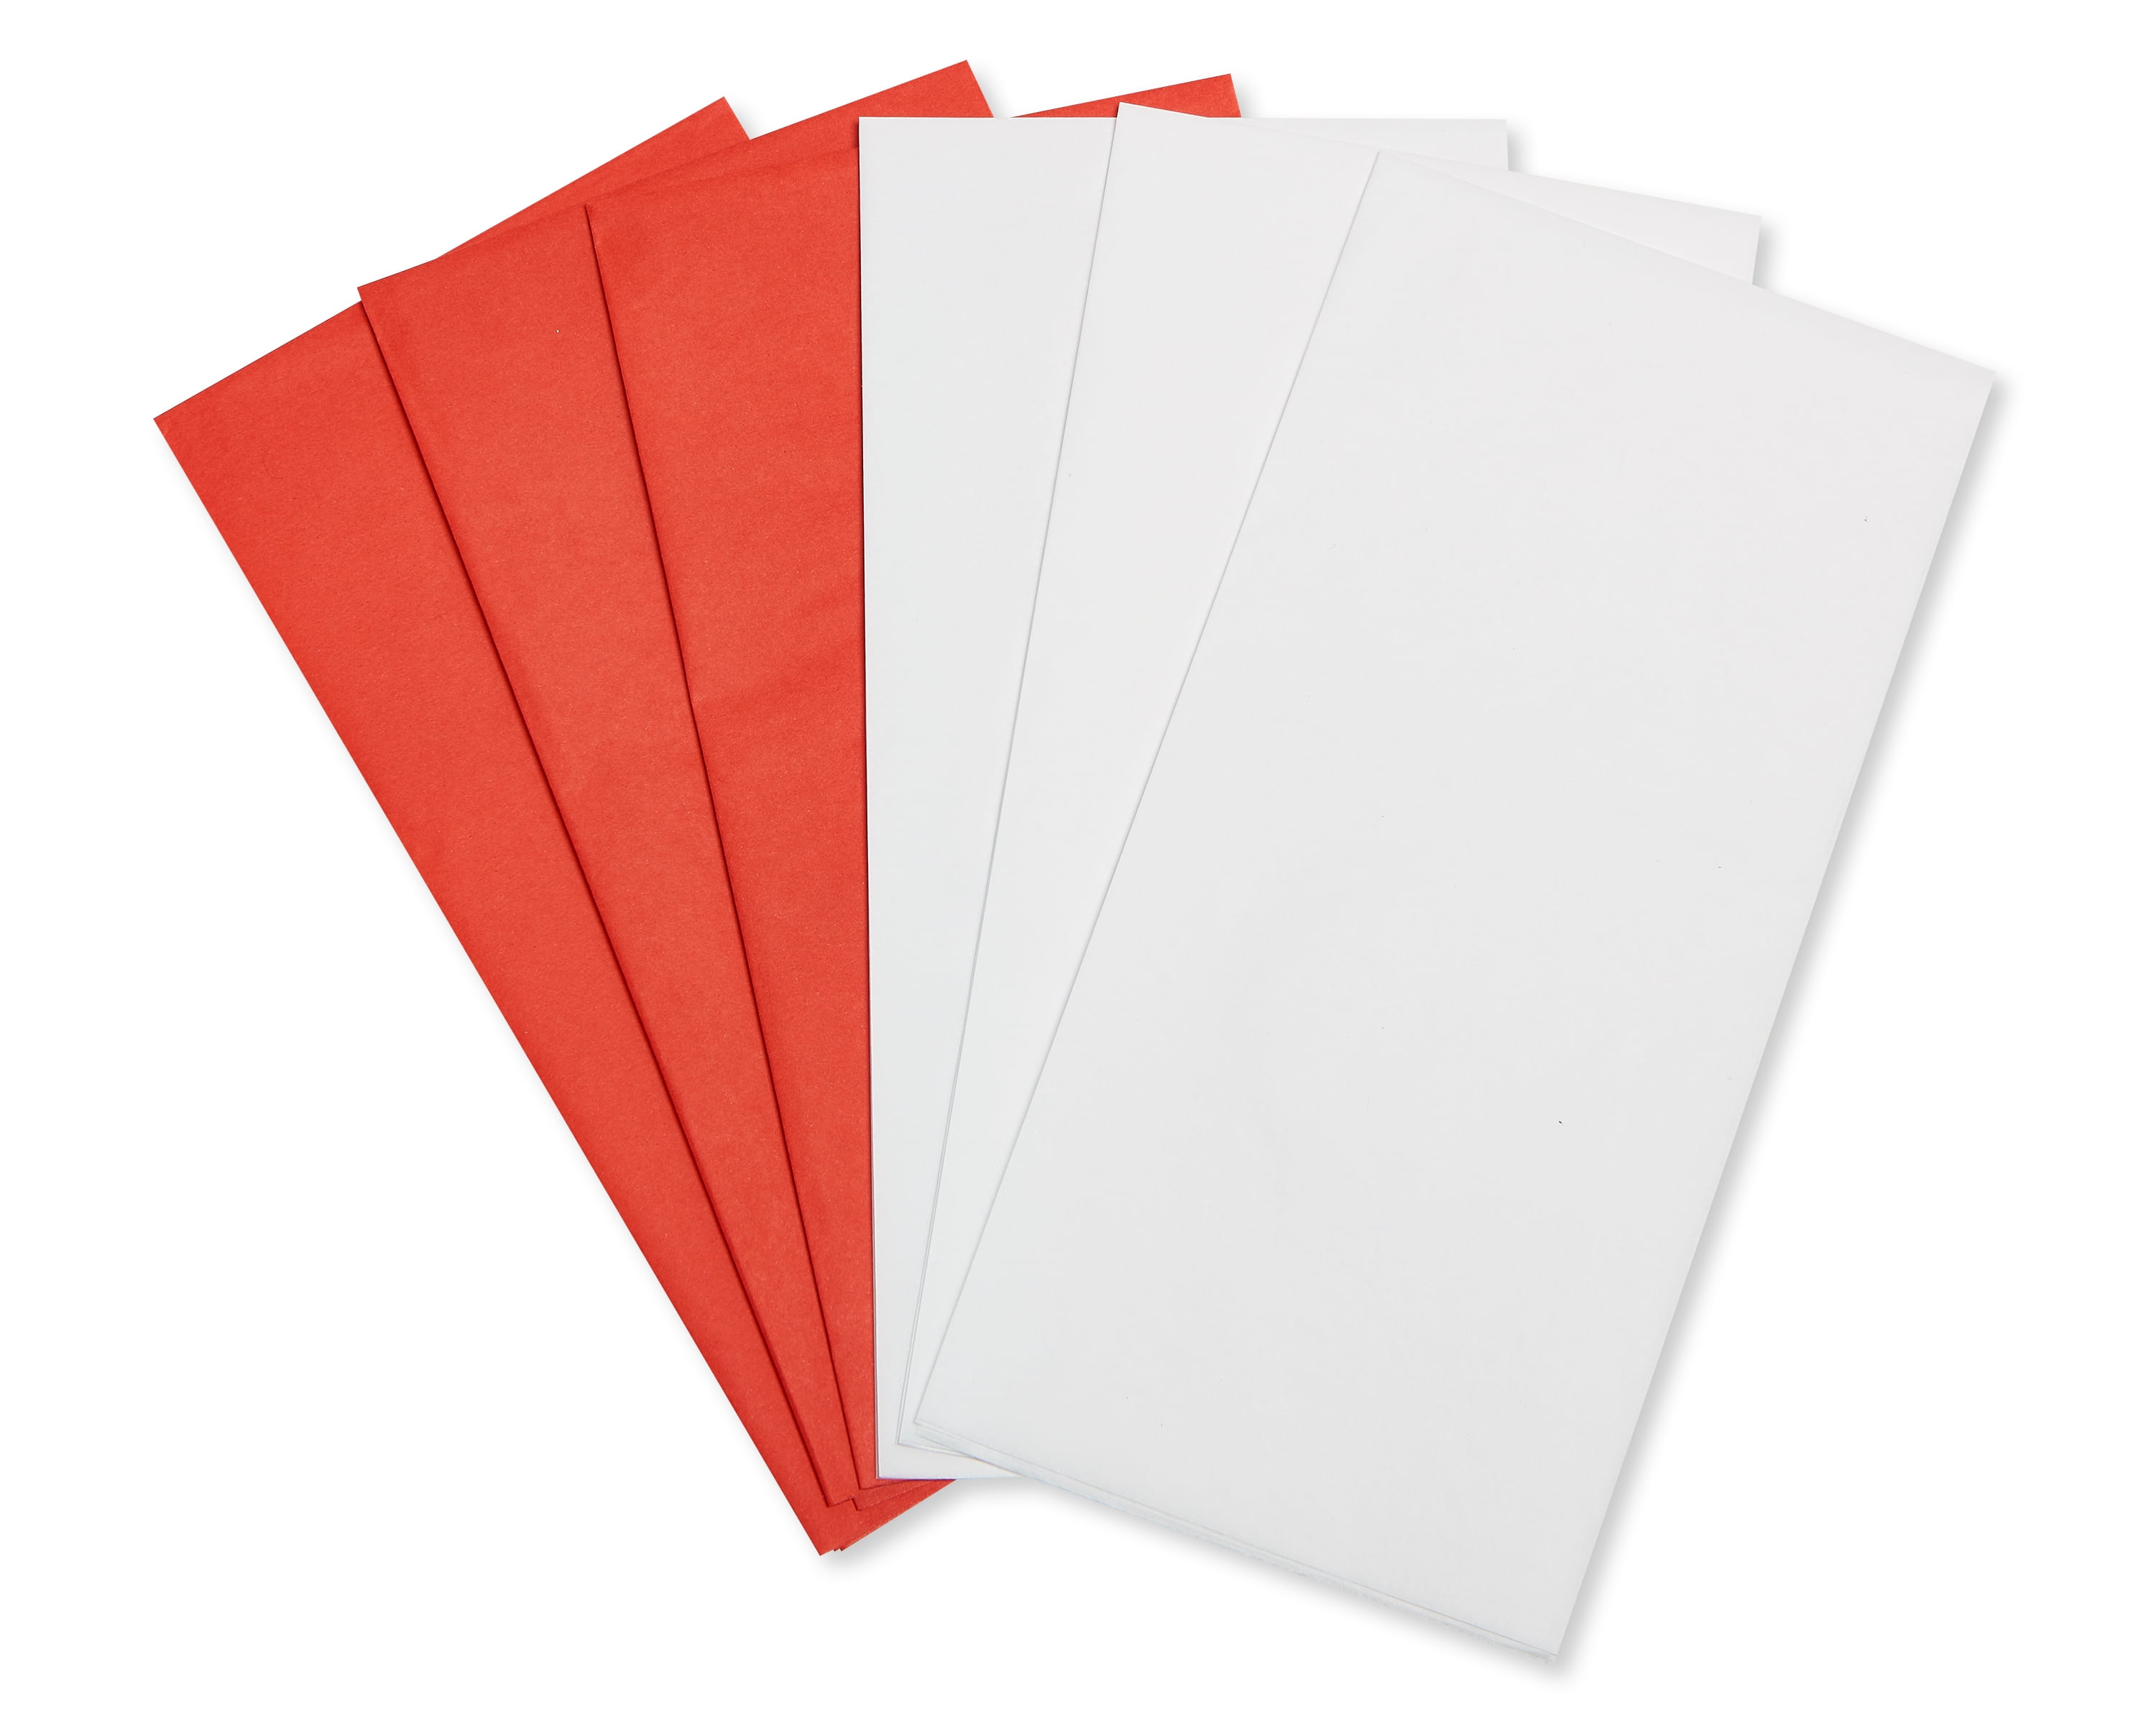 American Greetings Red Tissue Paper, 6 ct - Ralphs